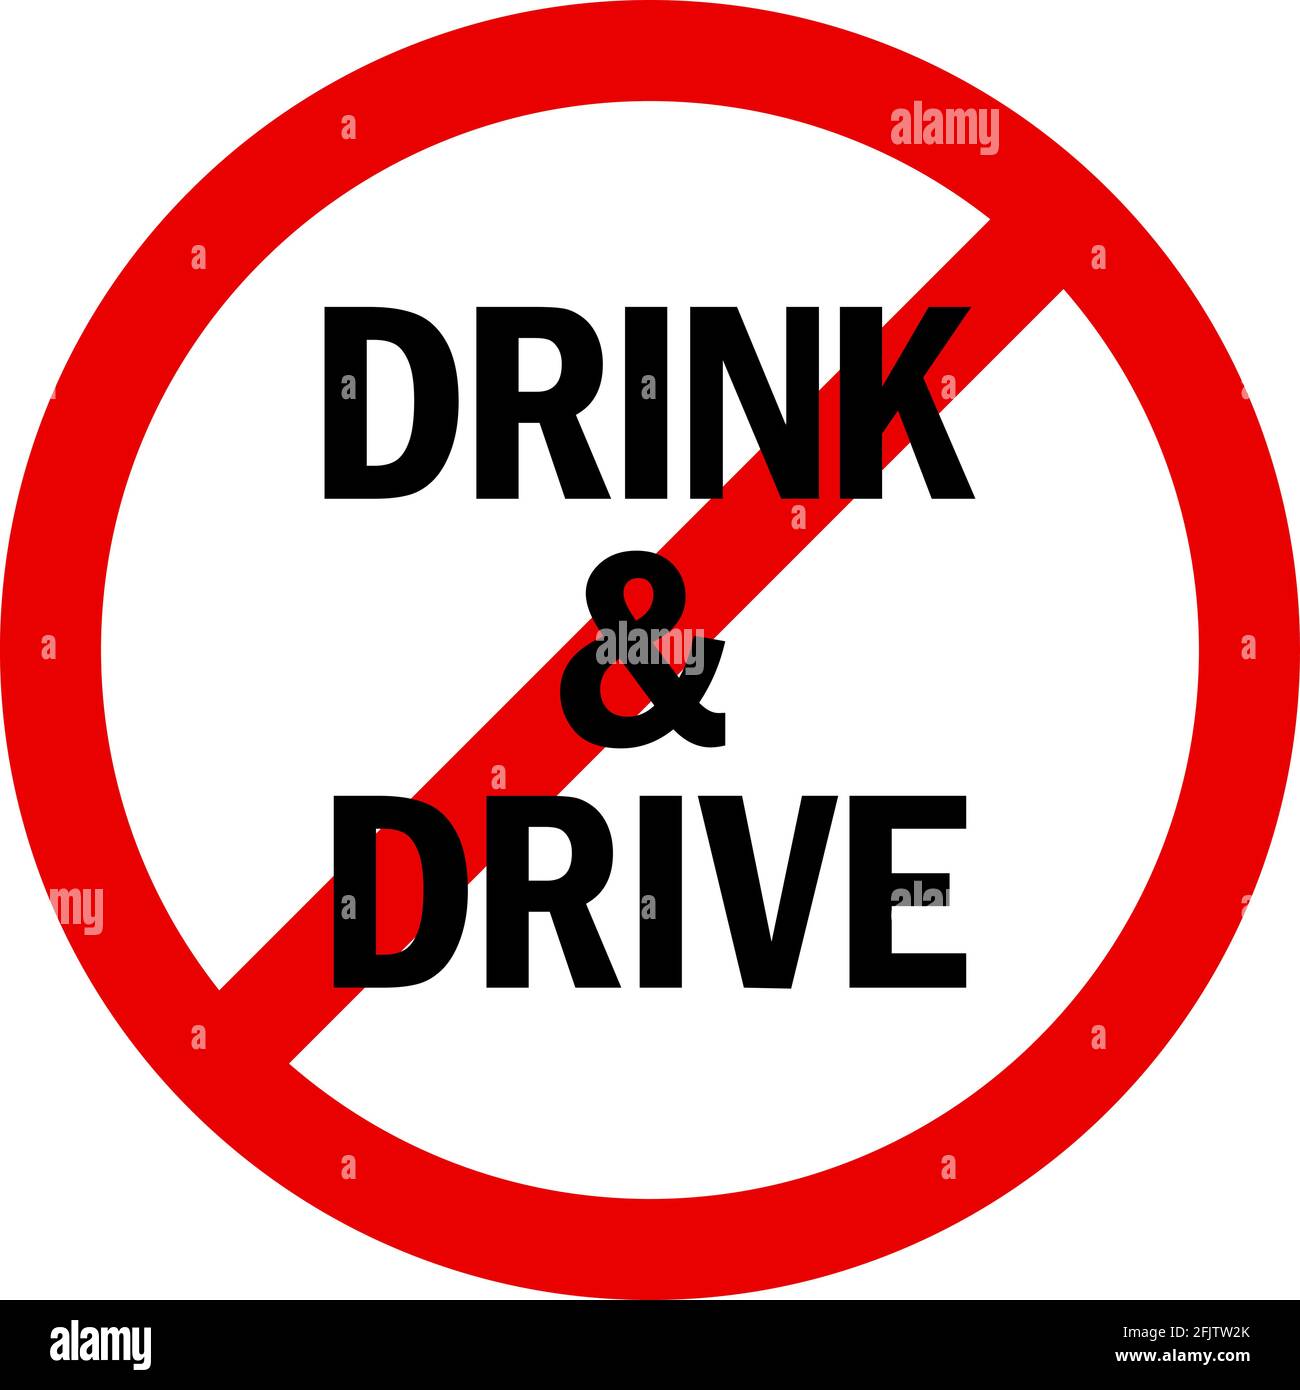 Do not drink and drive sign. Traffic signs and symbols. Stock Vector